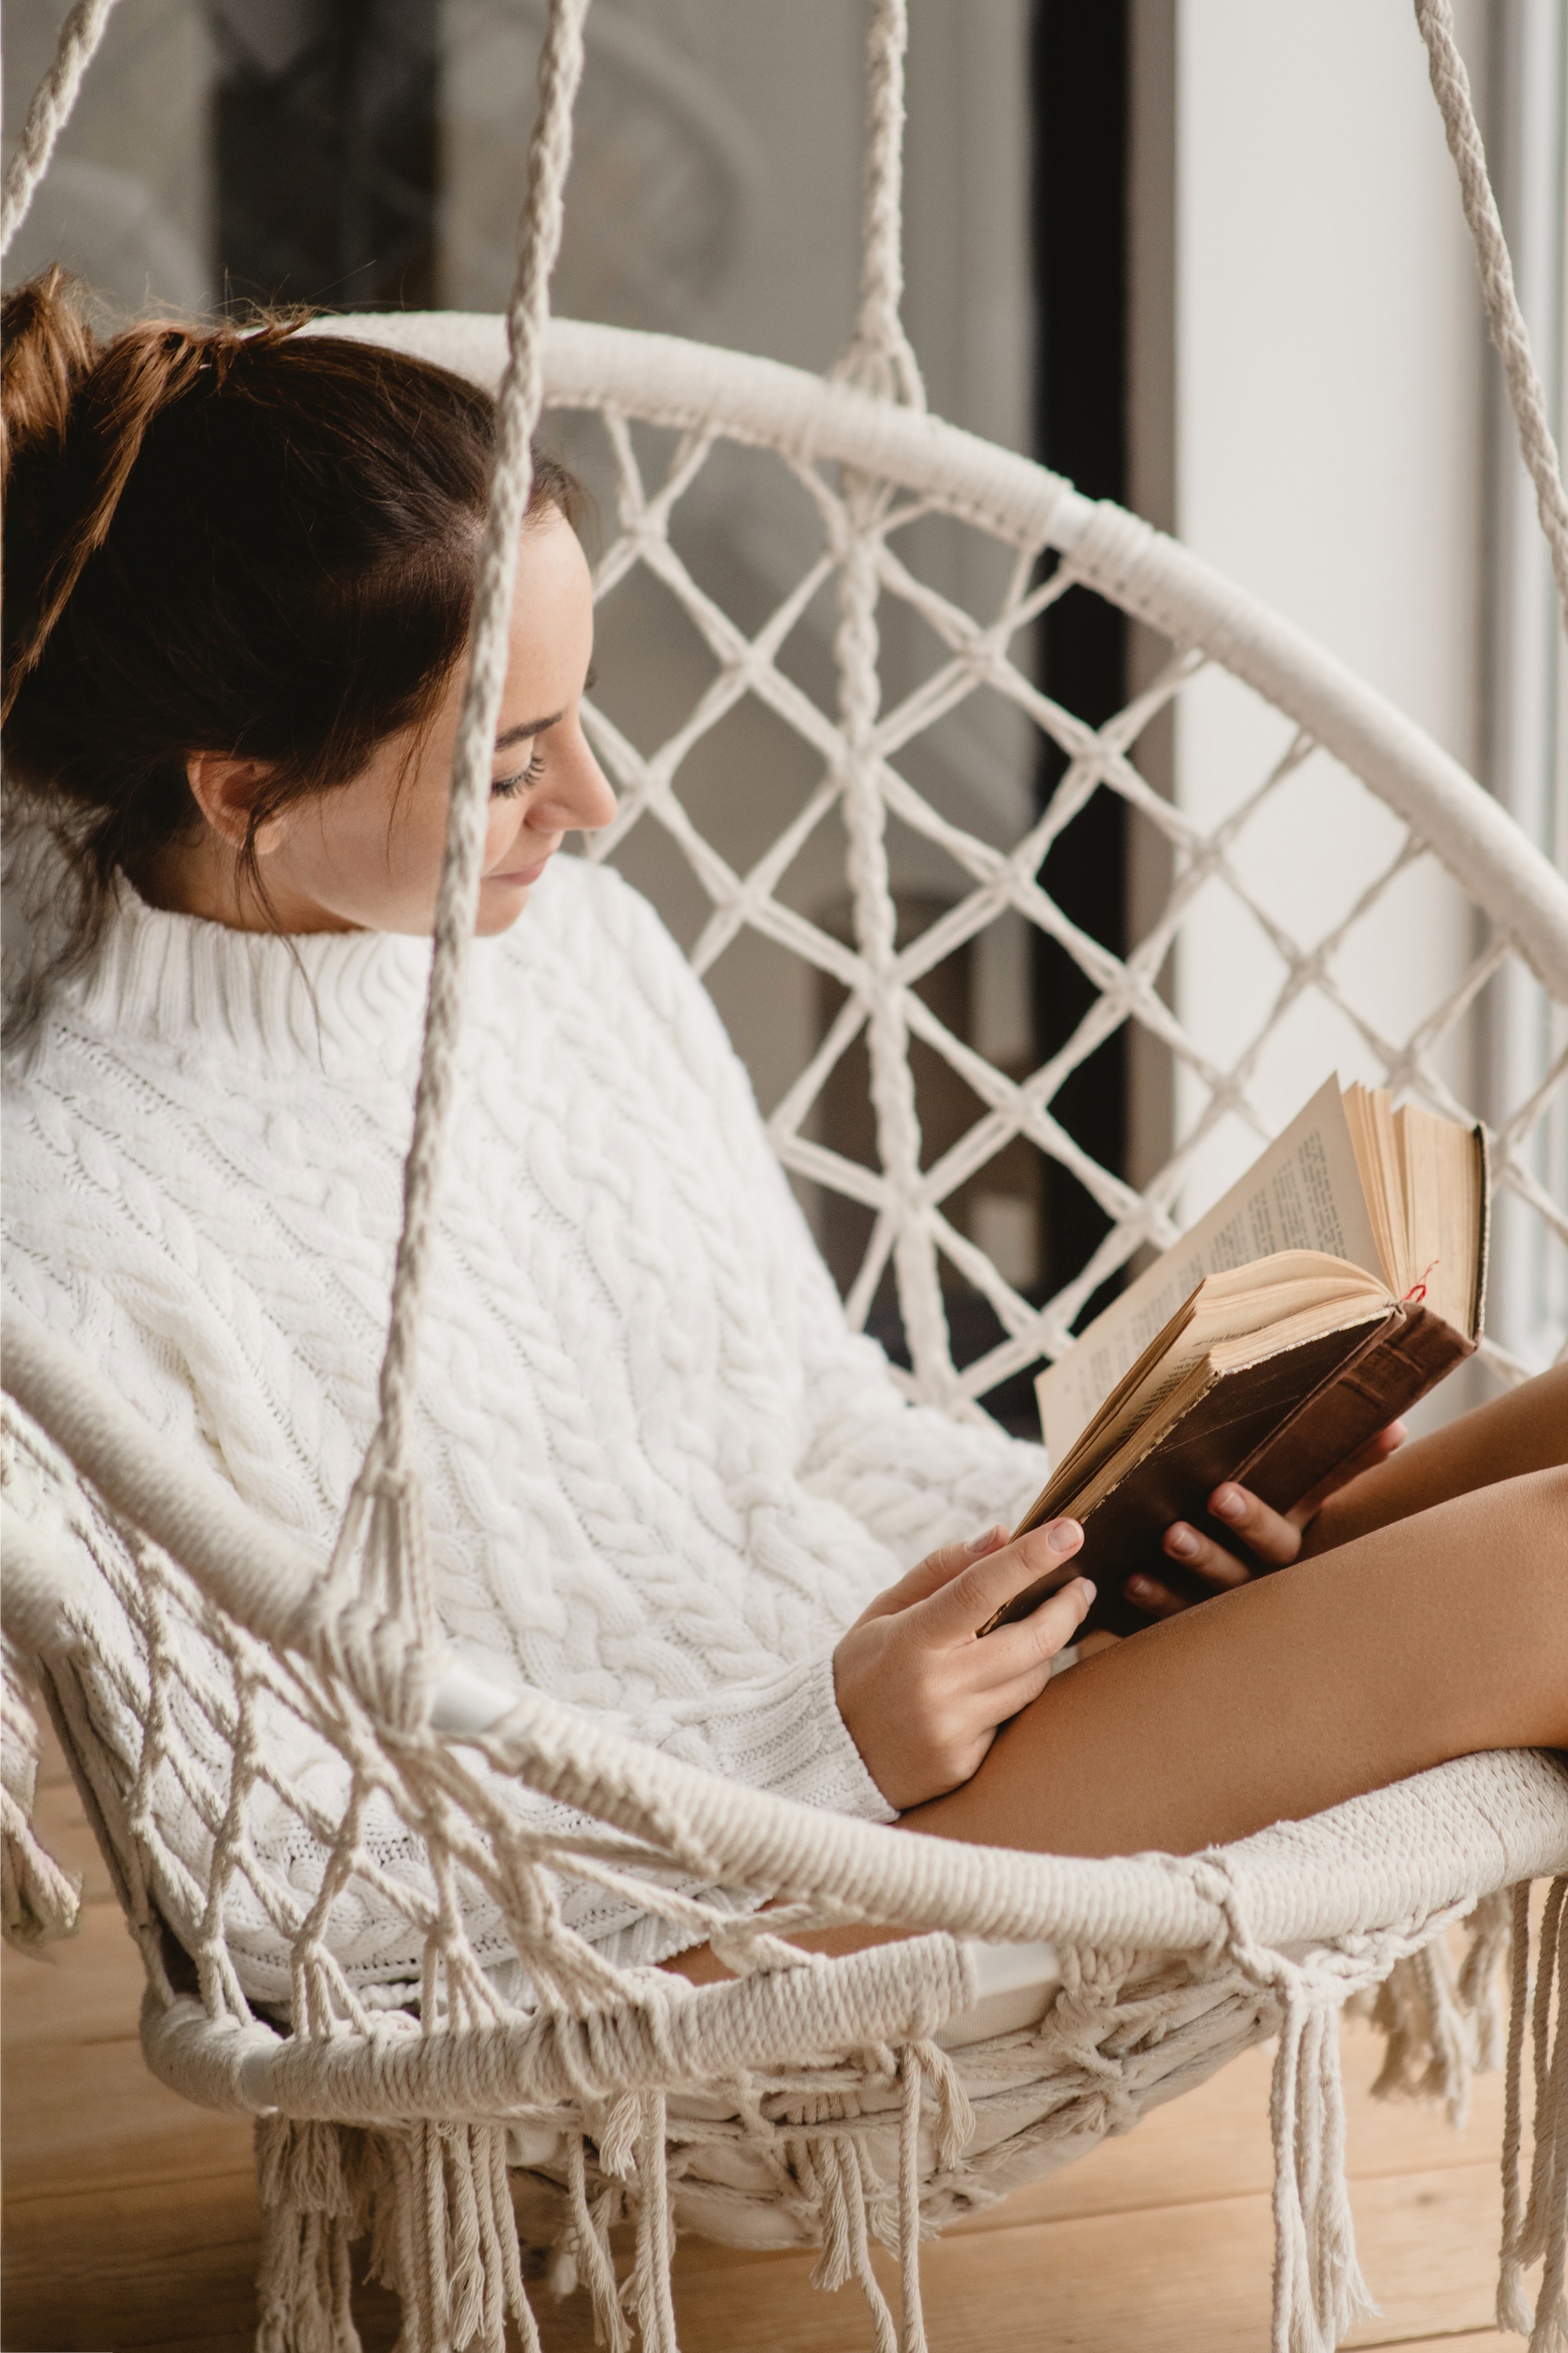 self-care and self-love, woman in cableknit white sweater reading in hammock swing